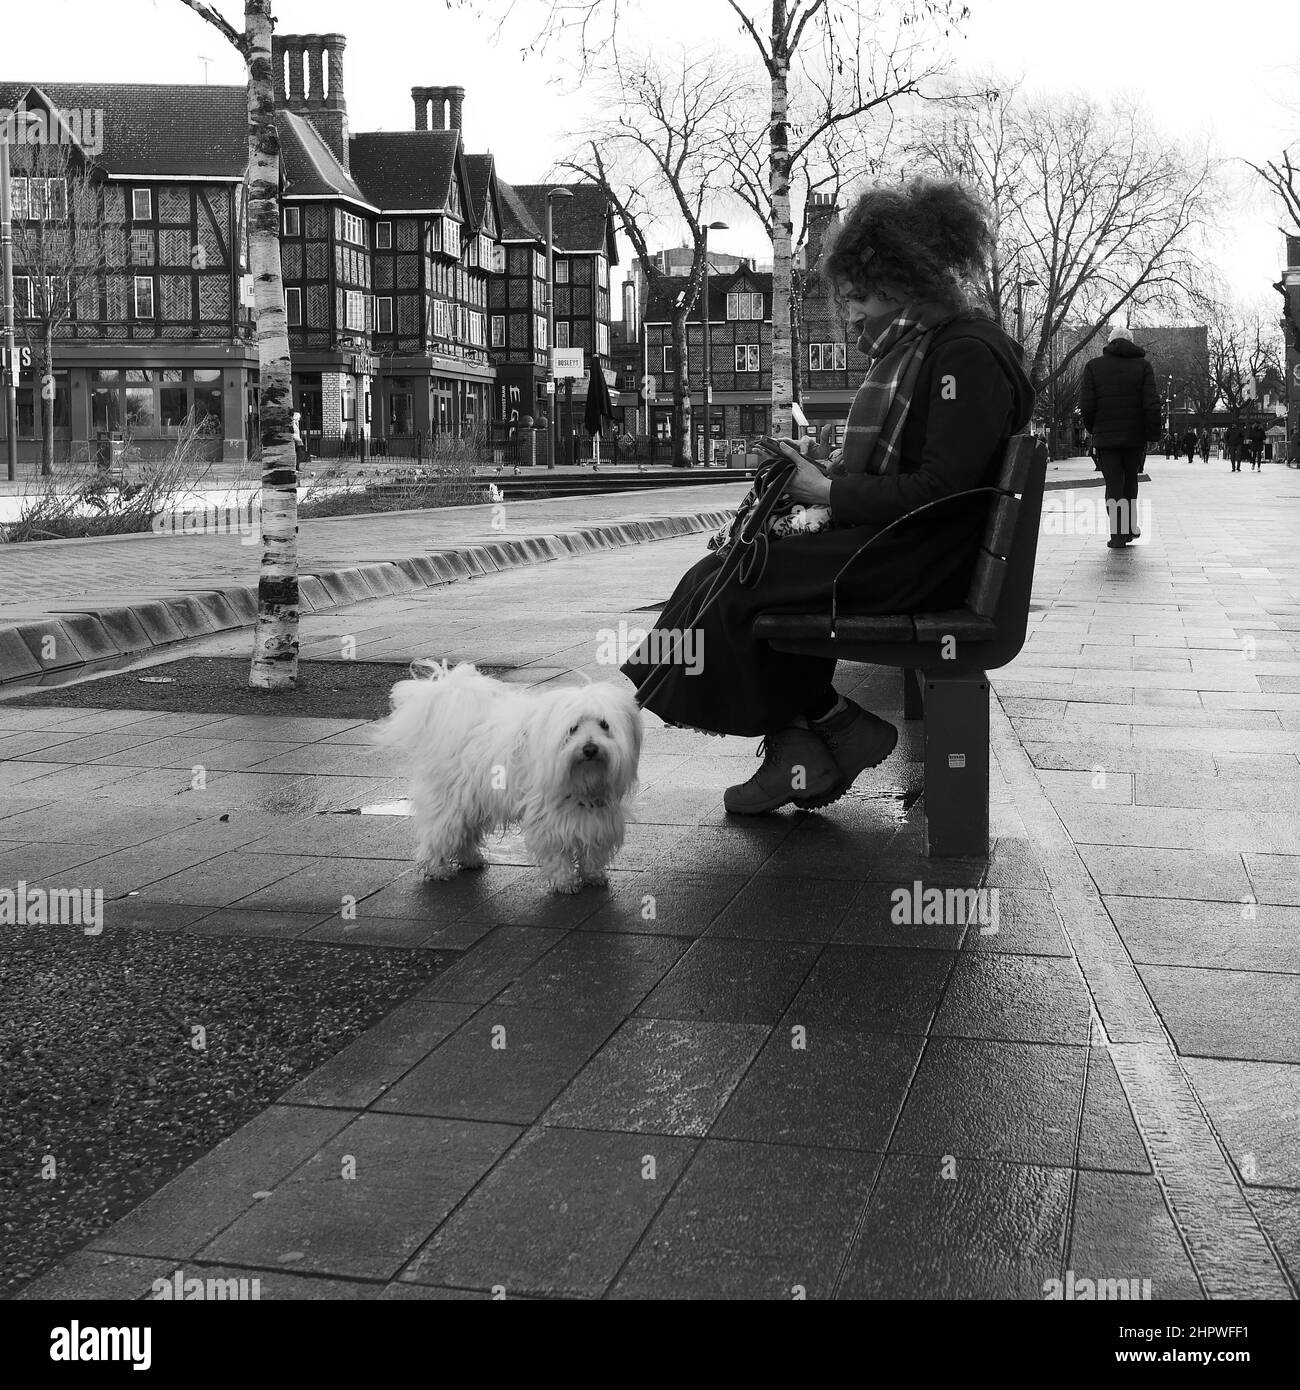 Elegant lady with scarf sat on a bench in winter in Watford High Street checking phone with a shaggy dog on a lead. Watford, Hertfordshire. Stock Photo